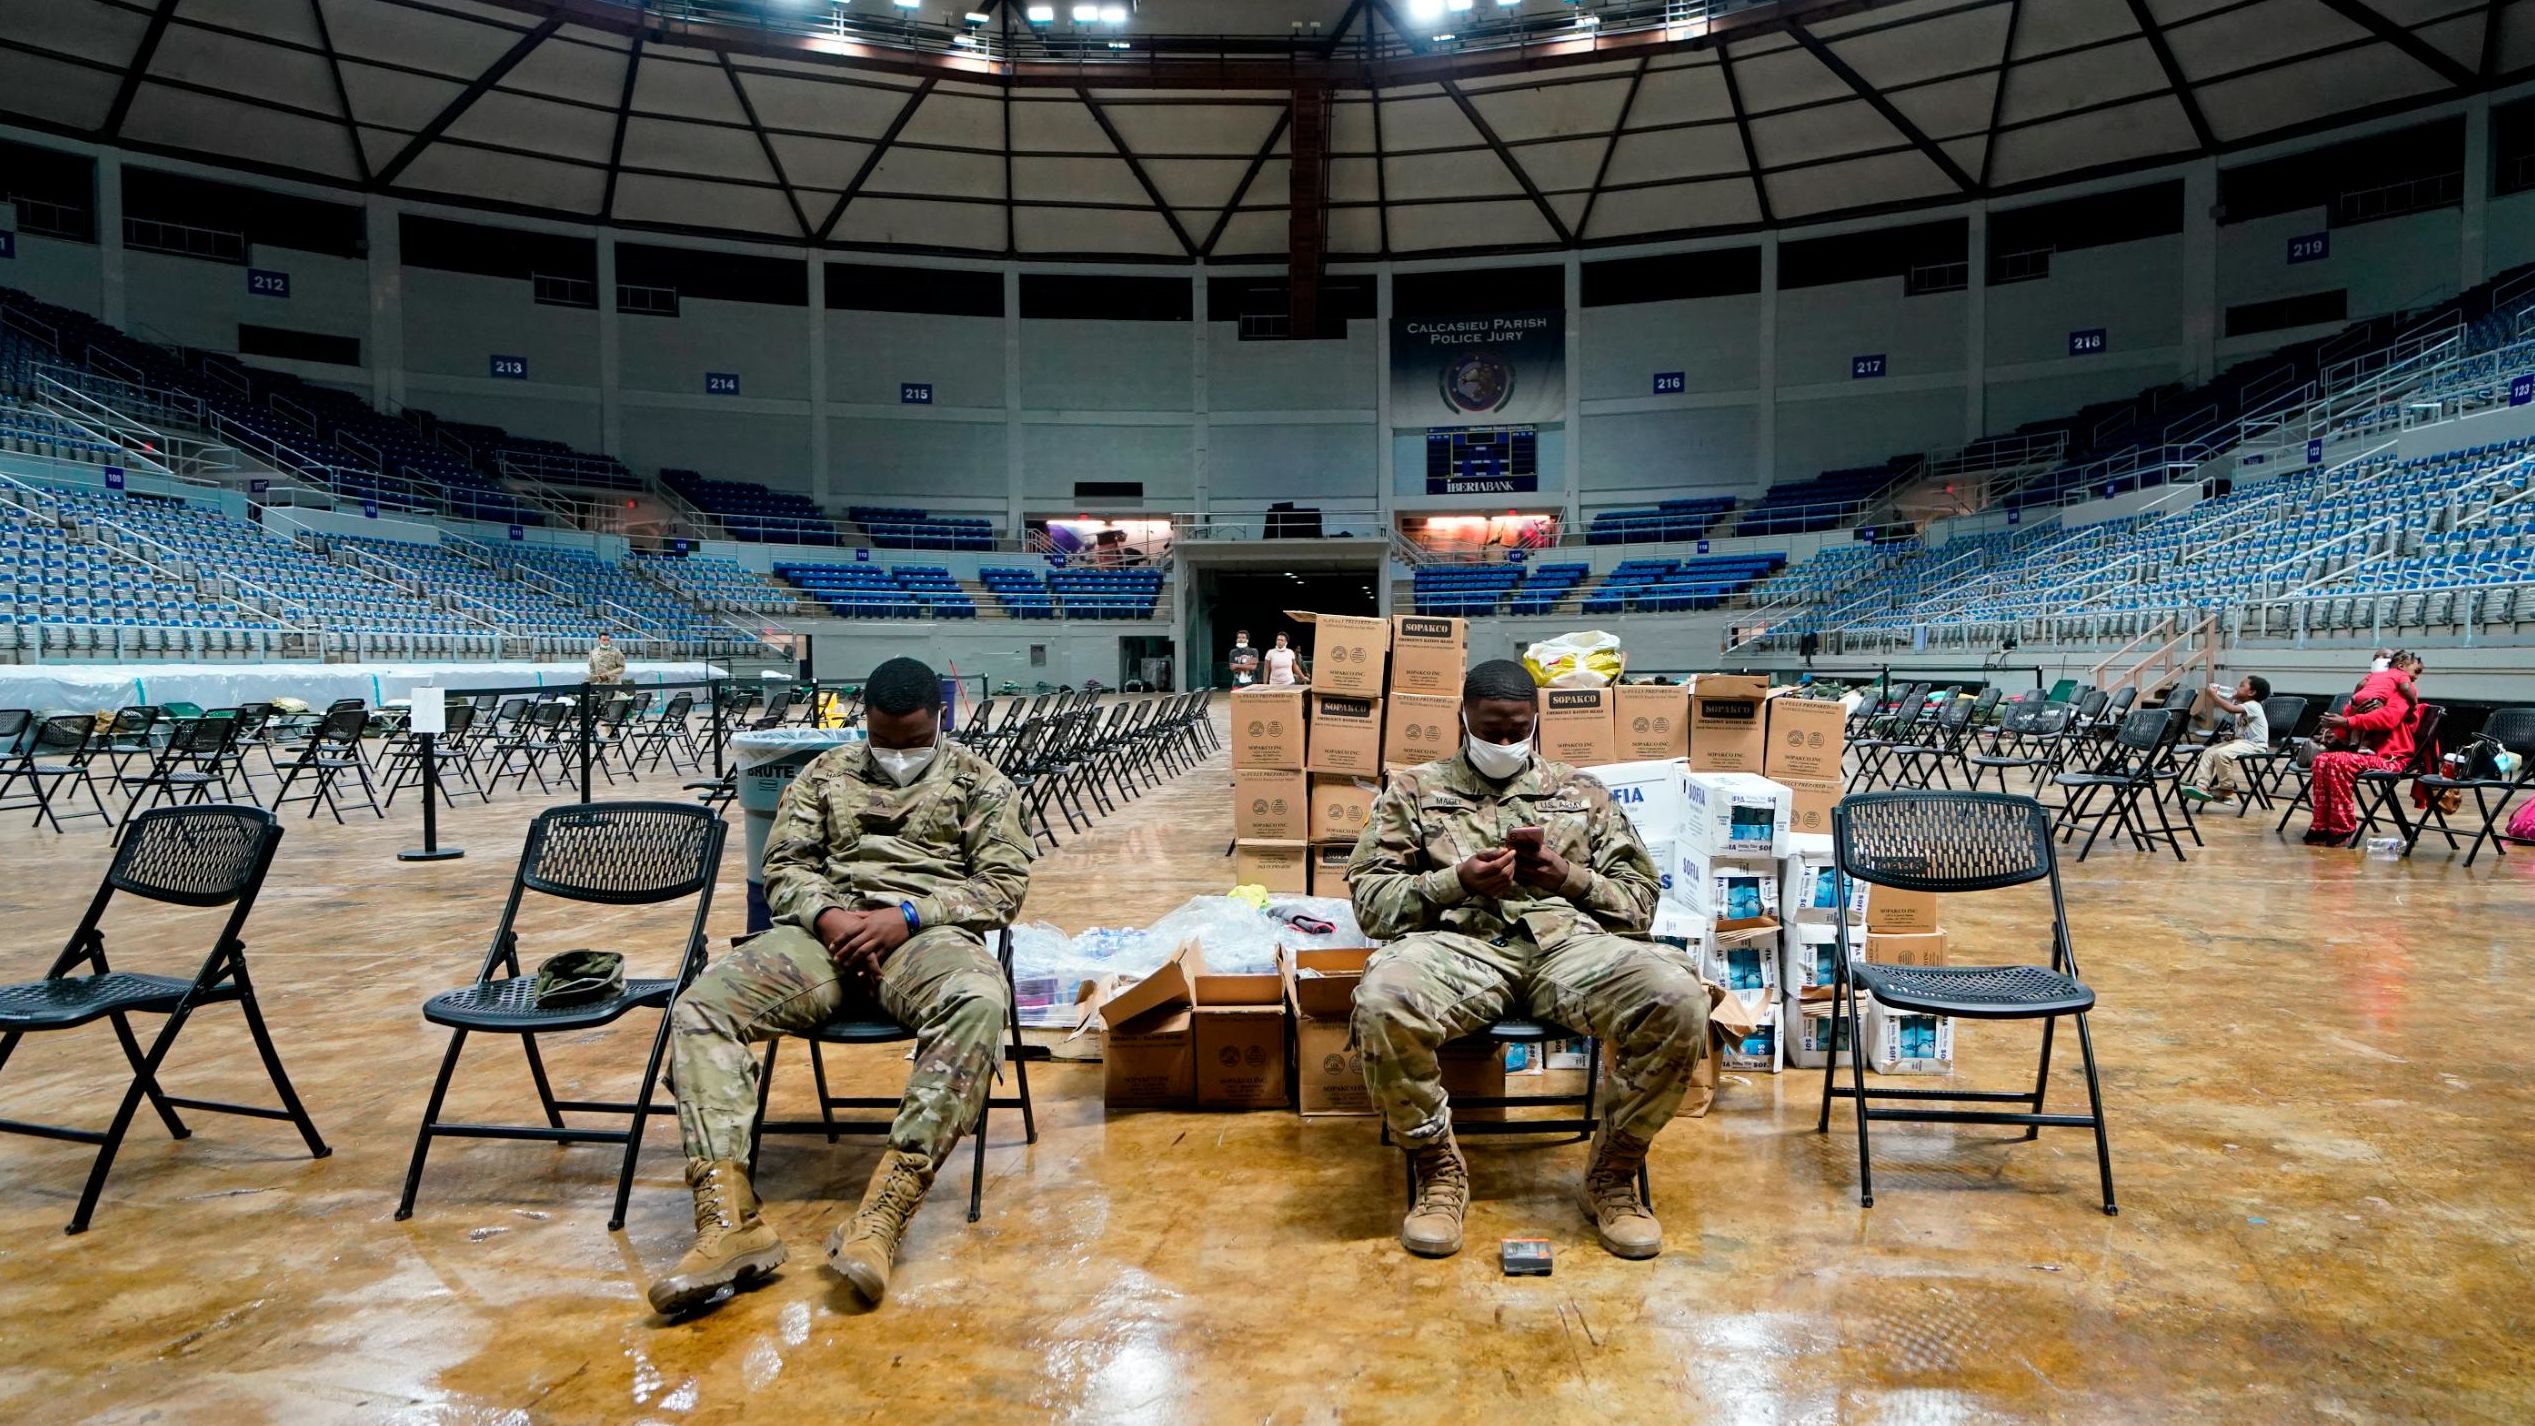 Members of the Louisiana National Guard prepare beds in a shelter ahead of Hurricane Delta on October 9 in Lake Charles, Louisiana.